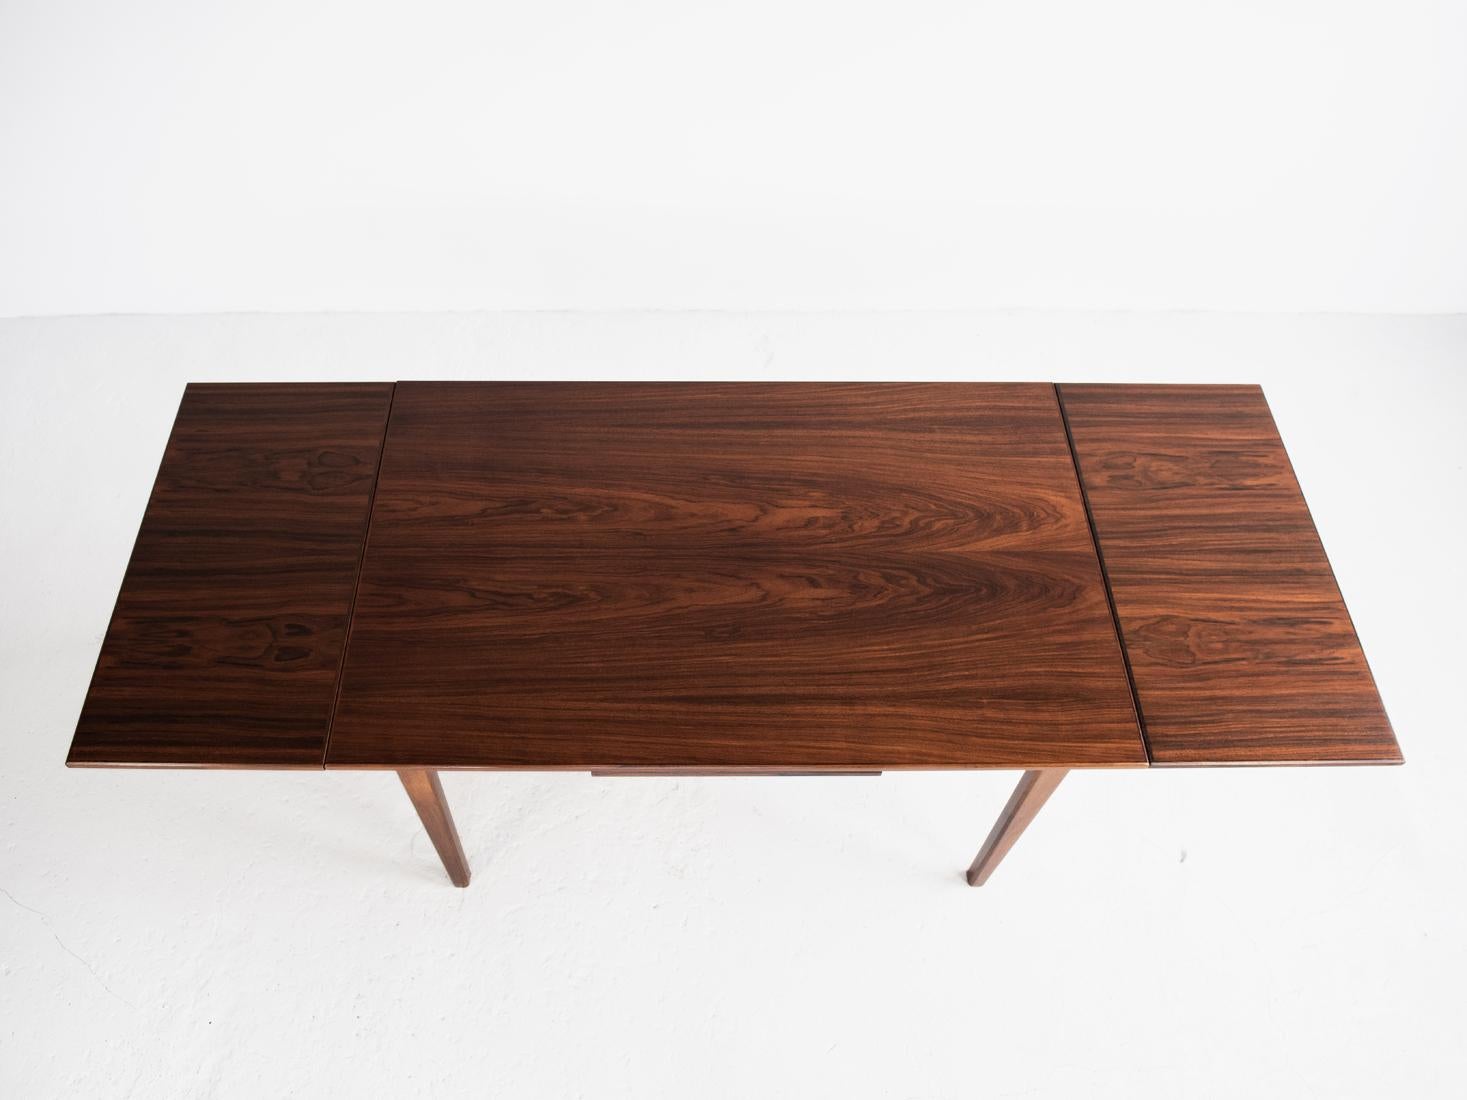 Midcentury Danish Dining Table in Rosewood with 2 Extensions, 1960s For Sale 4